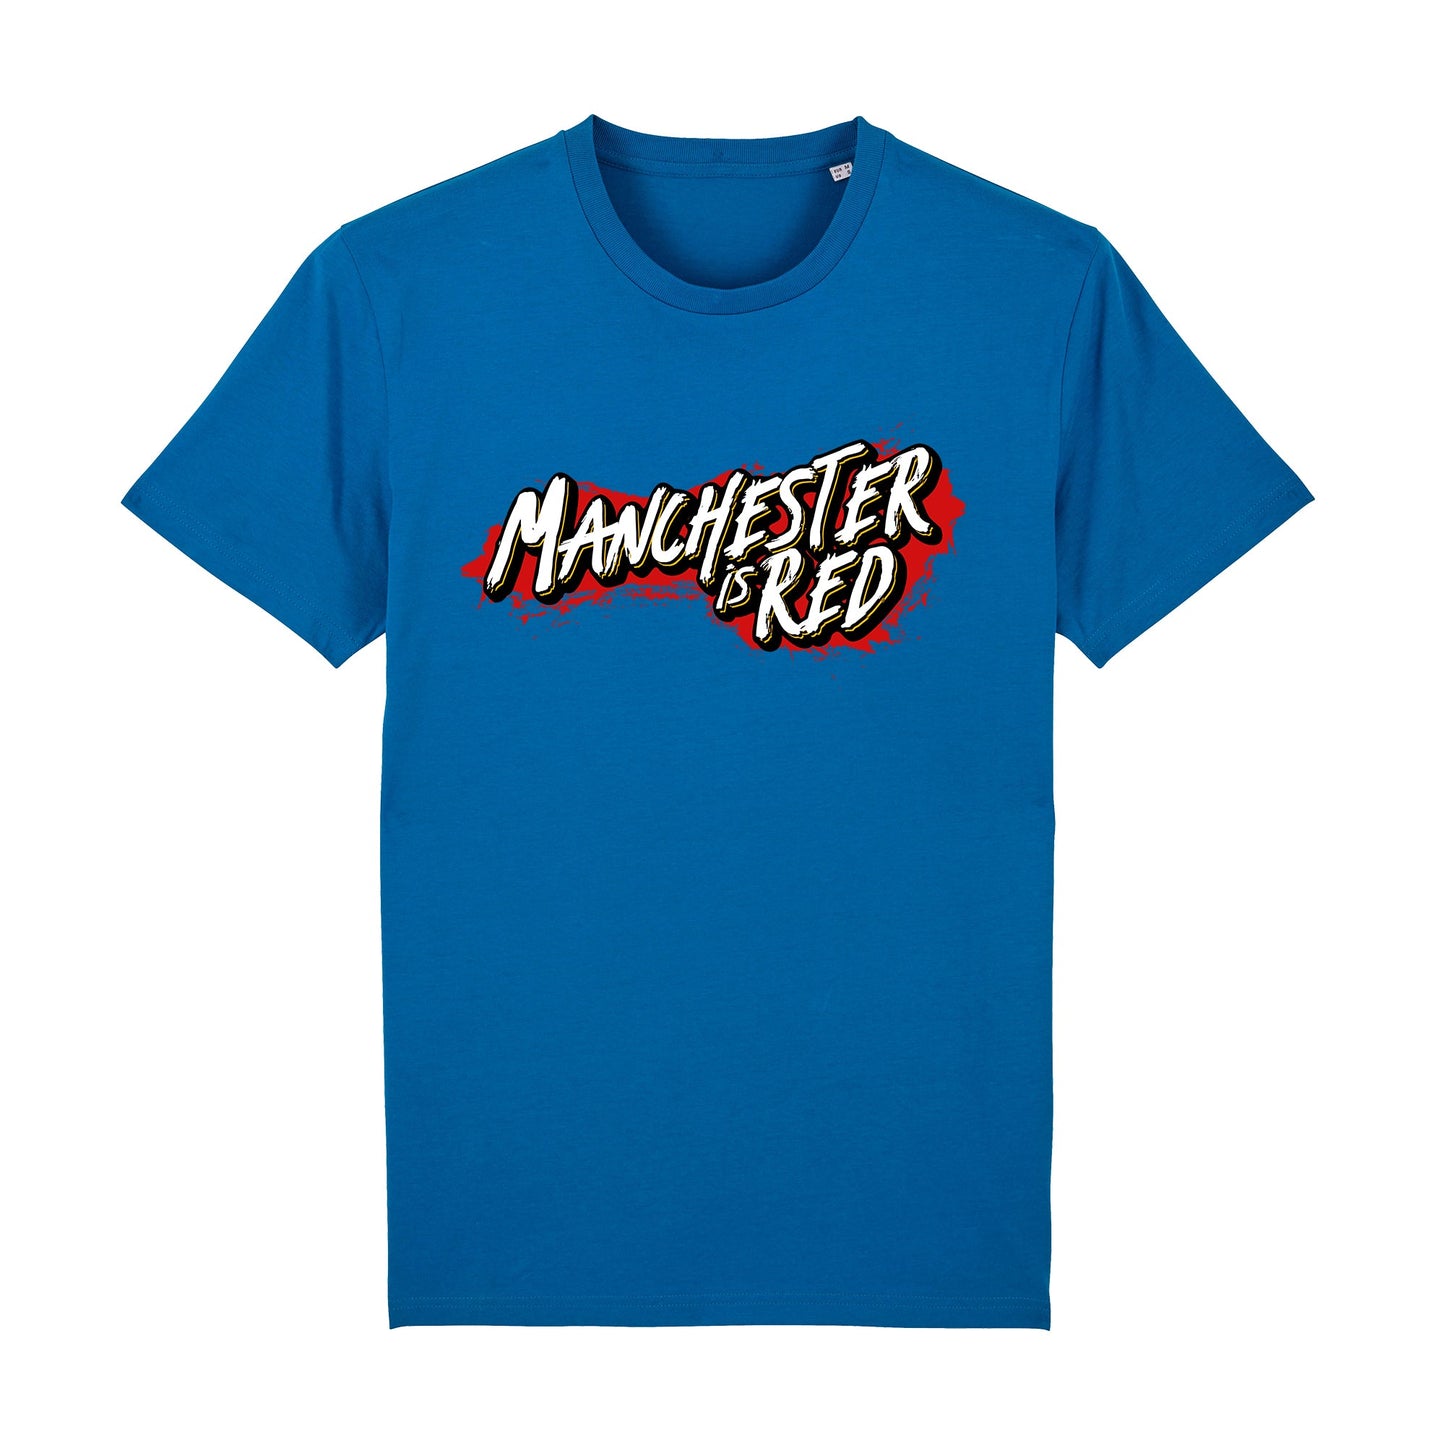 Manchester is Red Tee